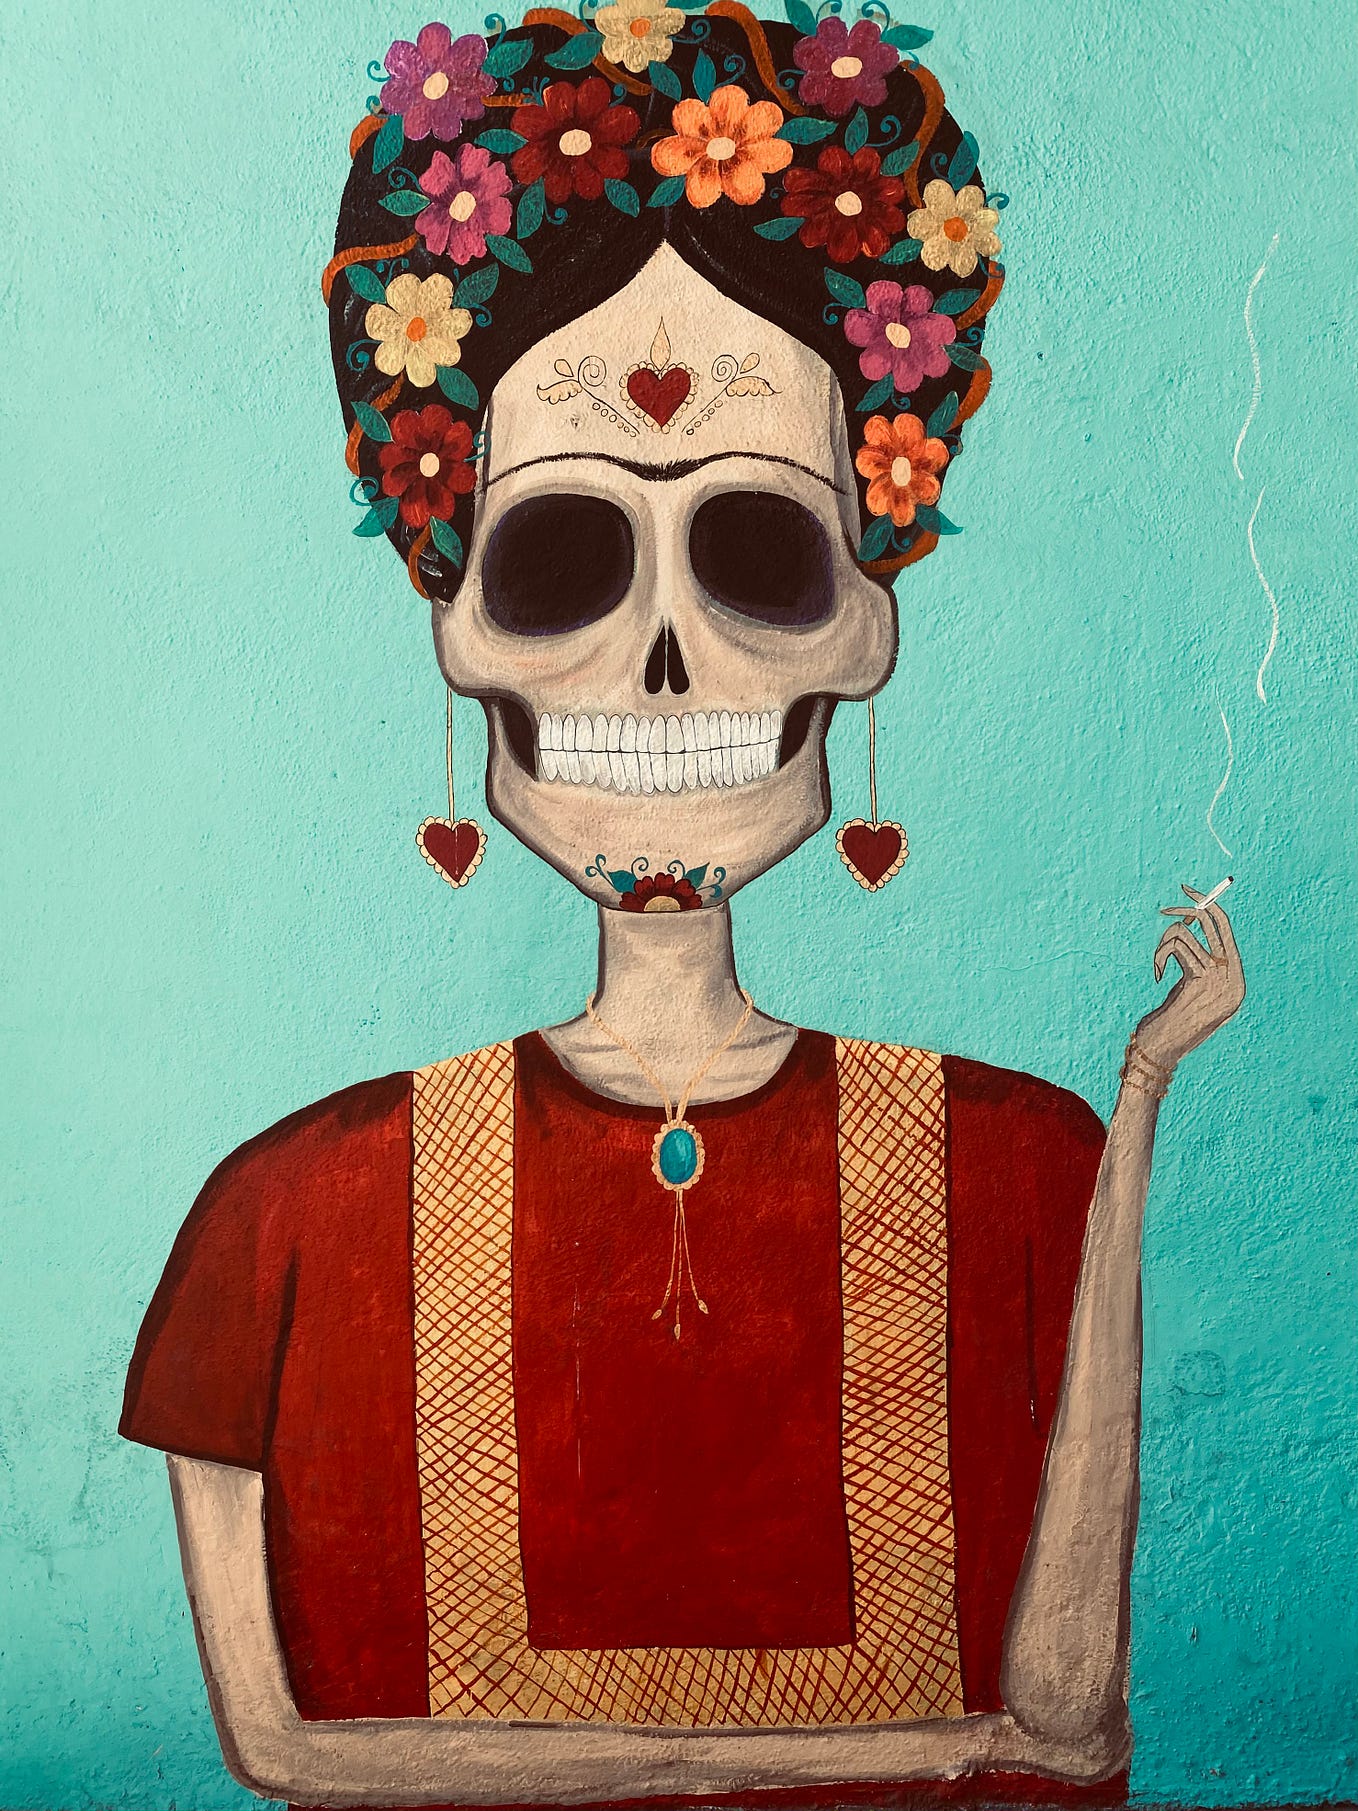 A mural on a blue wall. The mural depicts a sugar skull — a female-appearing skeleton covered in flowers and hearts. She is smoking a cigarette and grinning. Her unibrow suggests that she is Frida Khalo, or at least an homage to her.